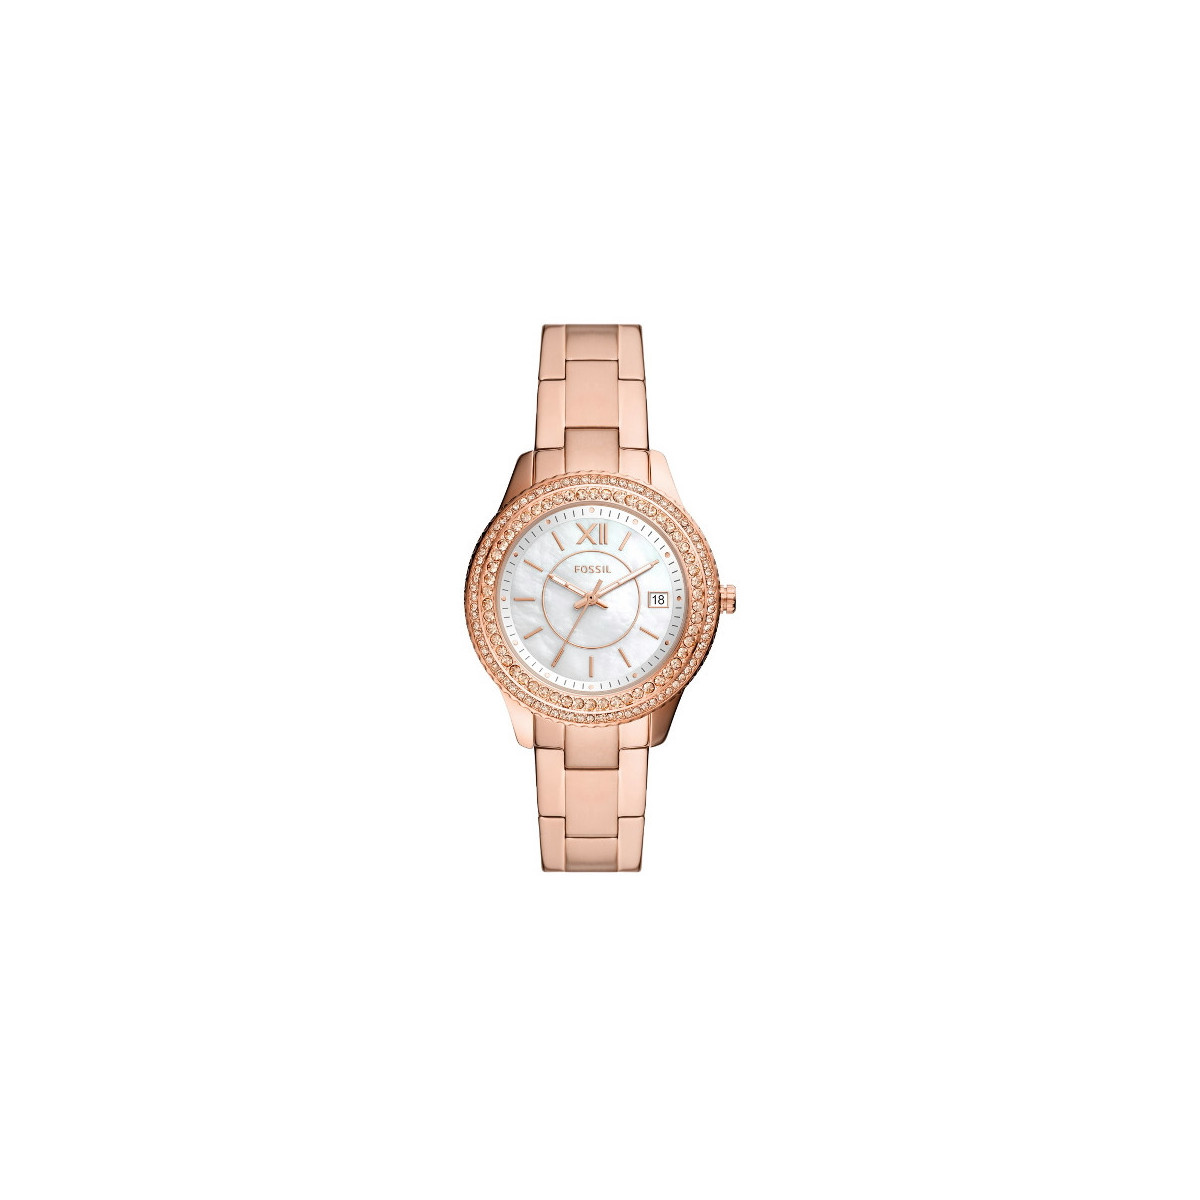 STELLA STAINLESS STEEL WATCH IN ROSE GOLD TONE WITH THREE HANDS AND DATE ES5131